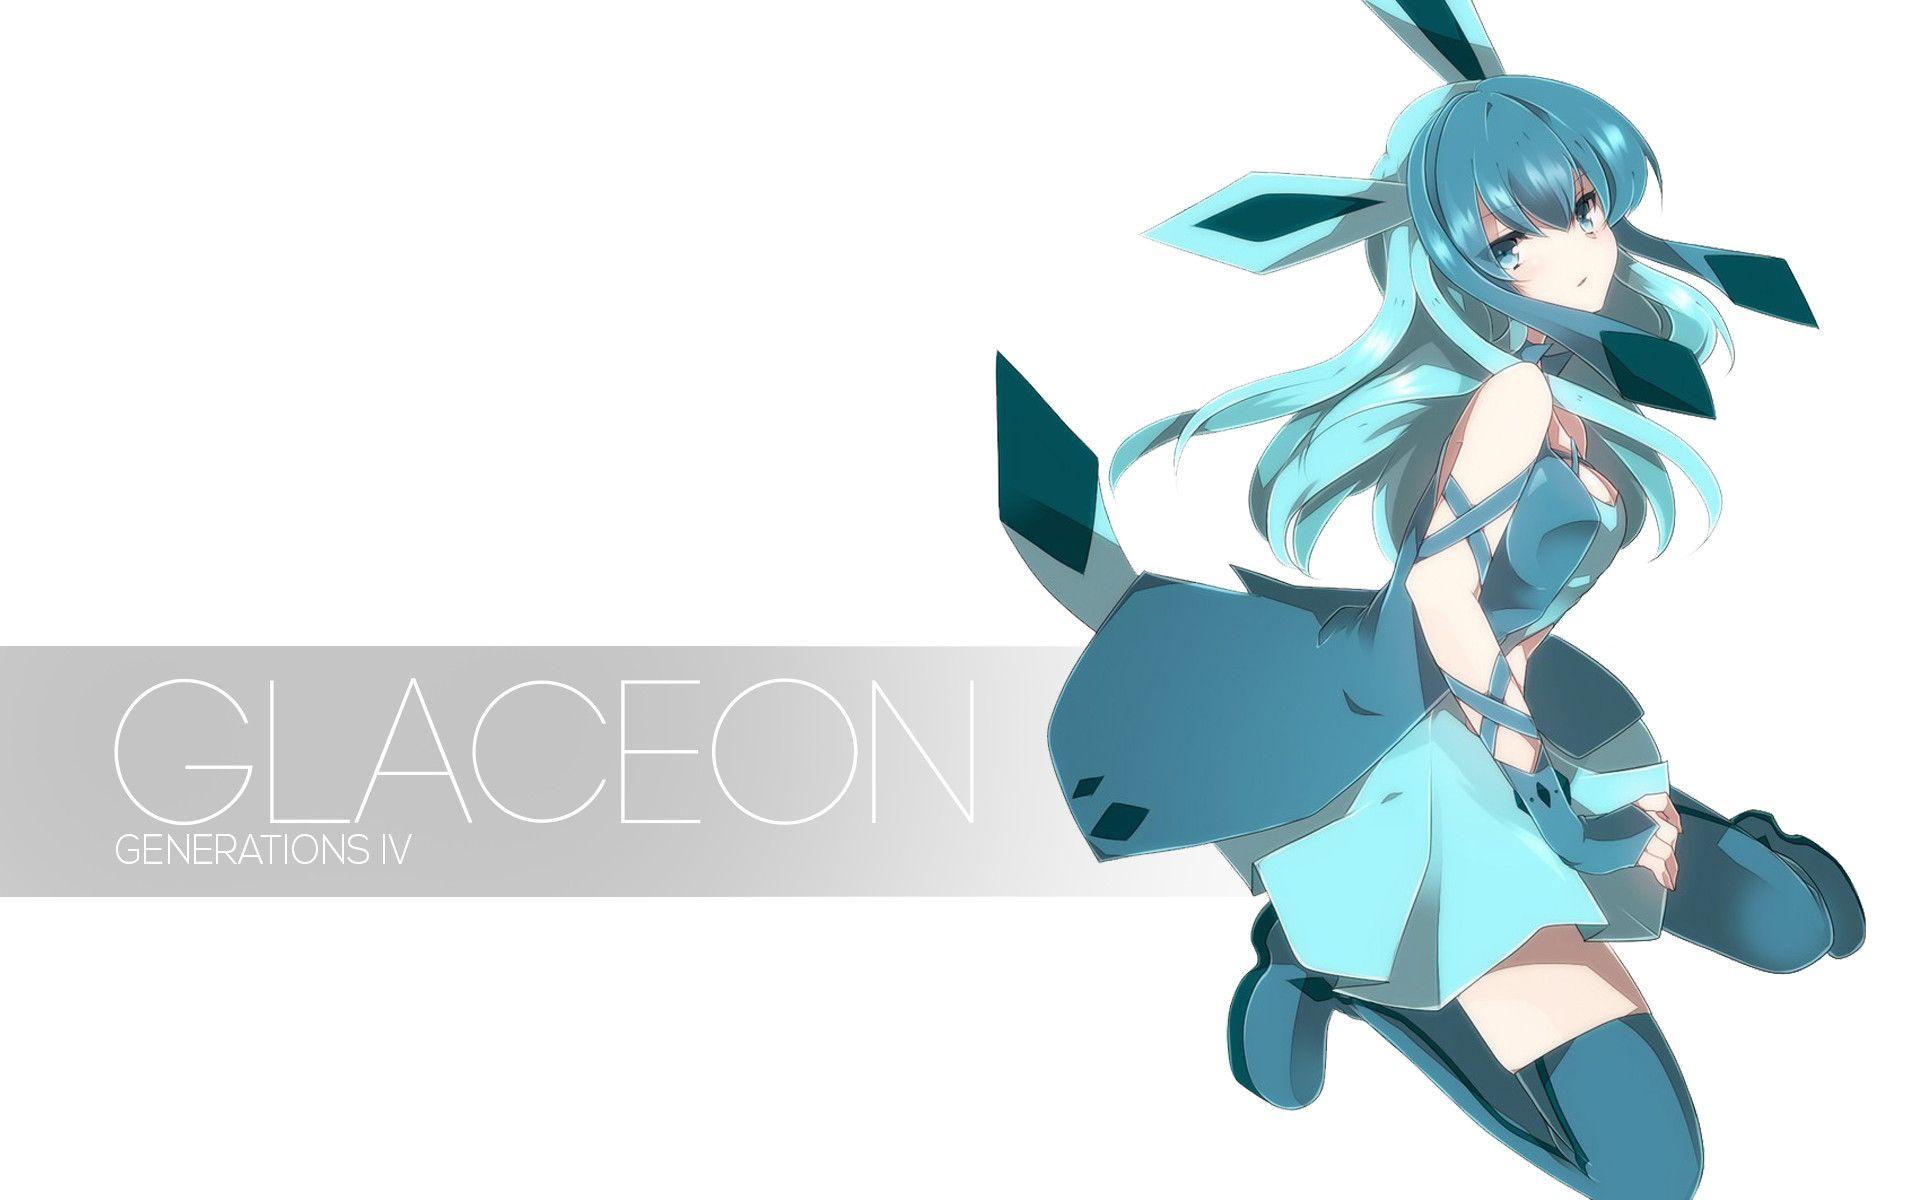 Glaceon Girl Wallpapers.